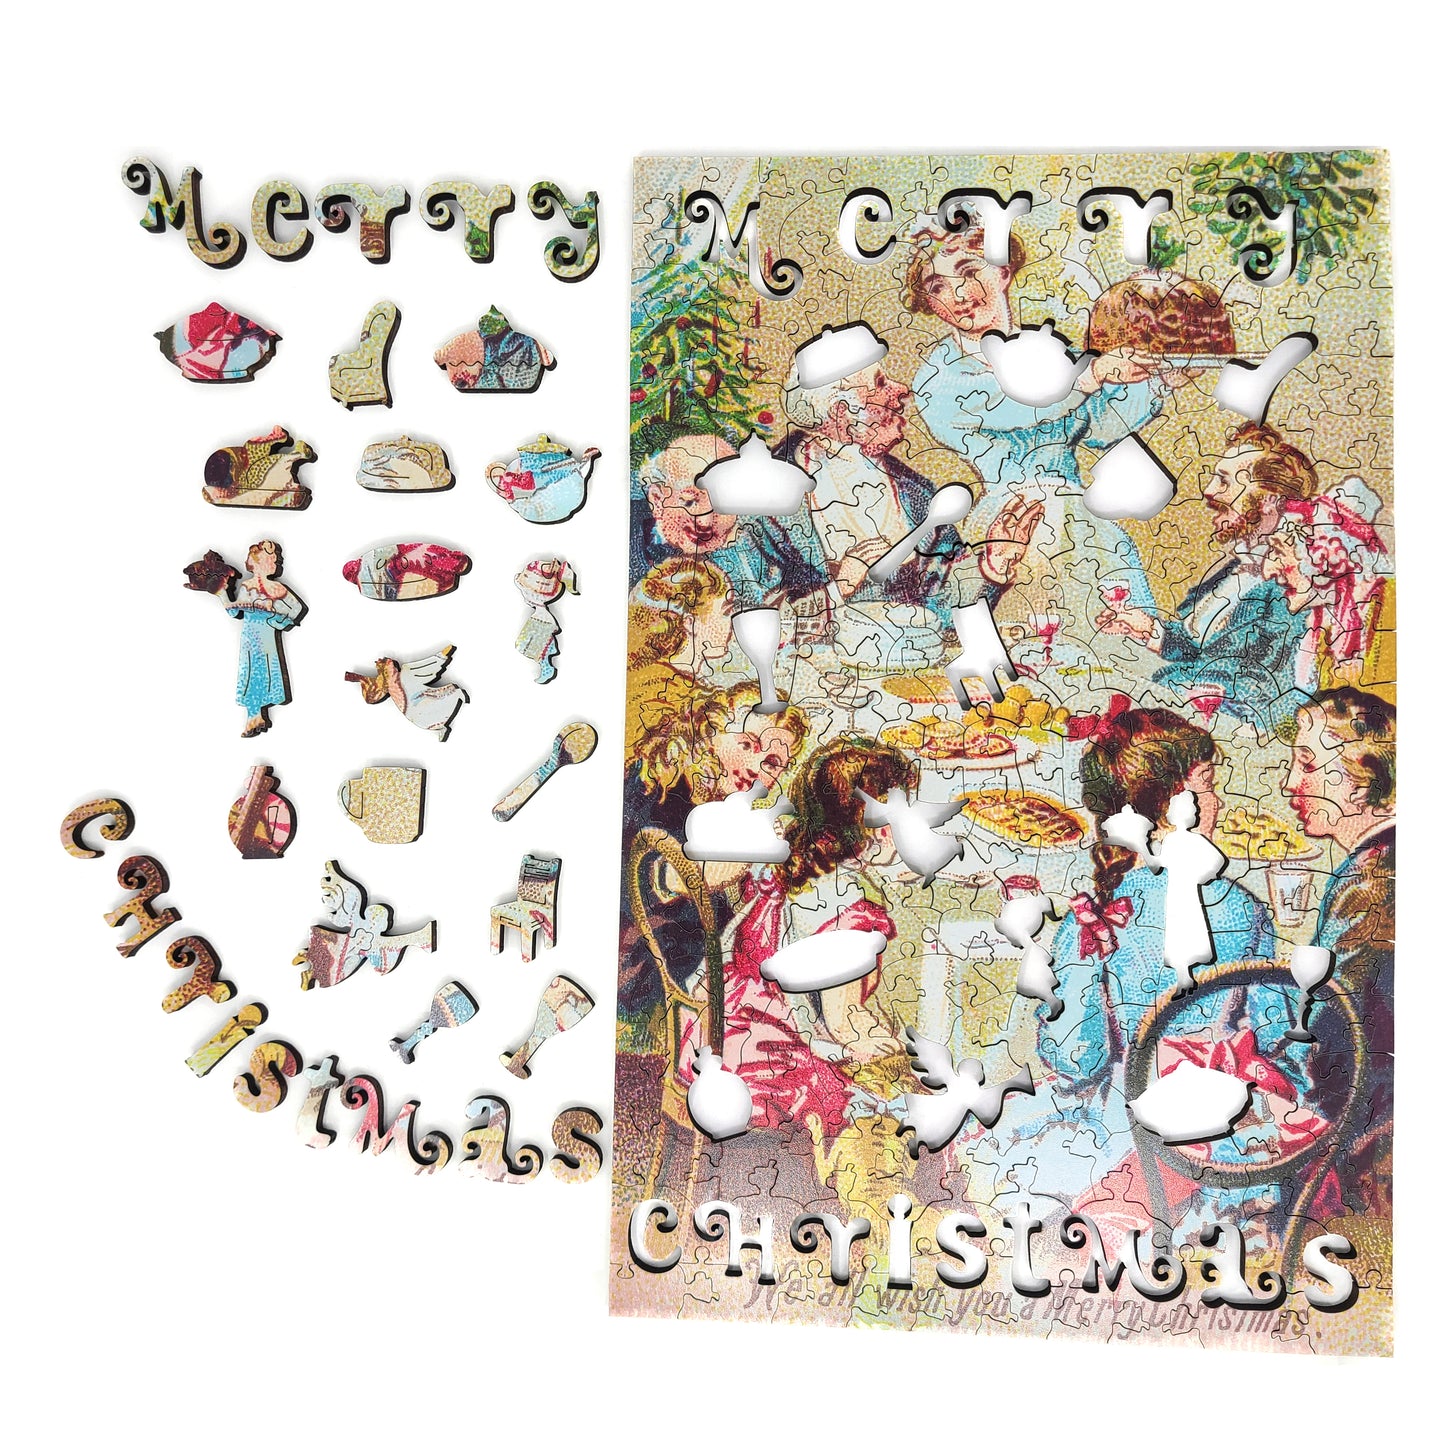 Wooden Jigsaw Puzzle with Uniquely Shaped Pieces for Adults - 205 Pieces - We all wish you a merry Christmas